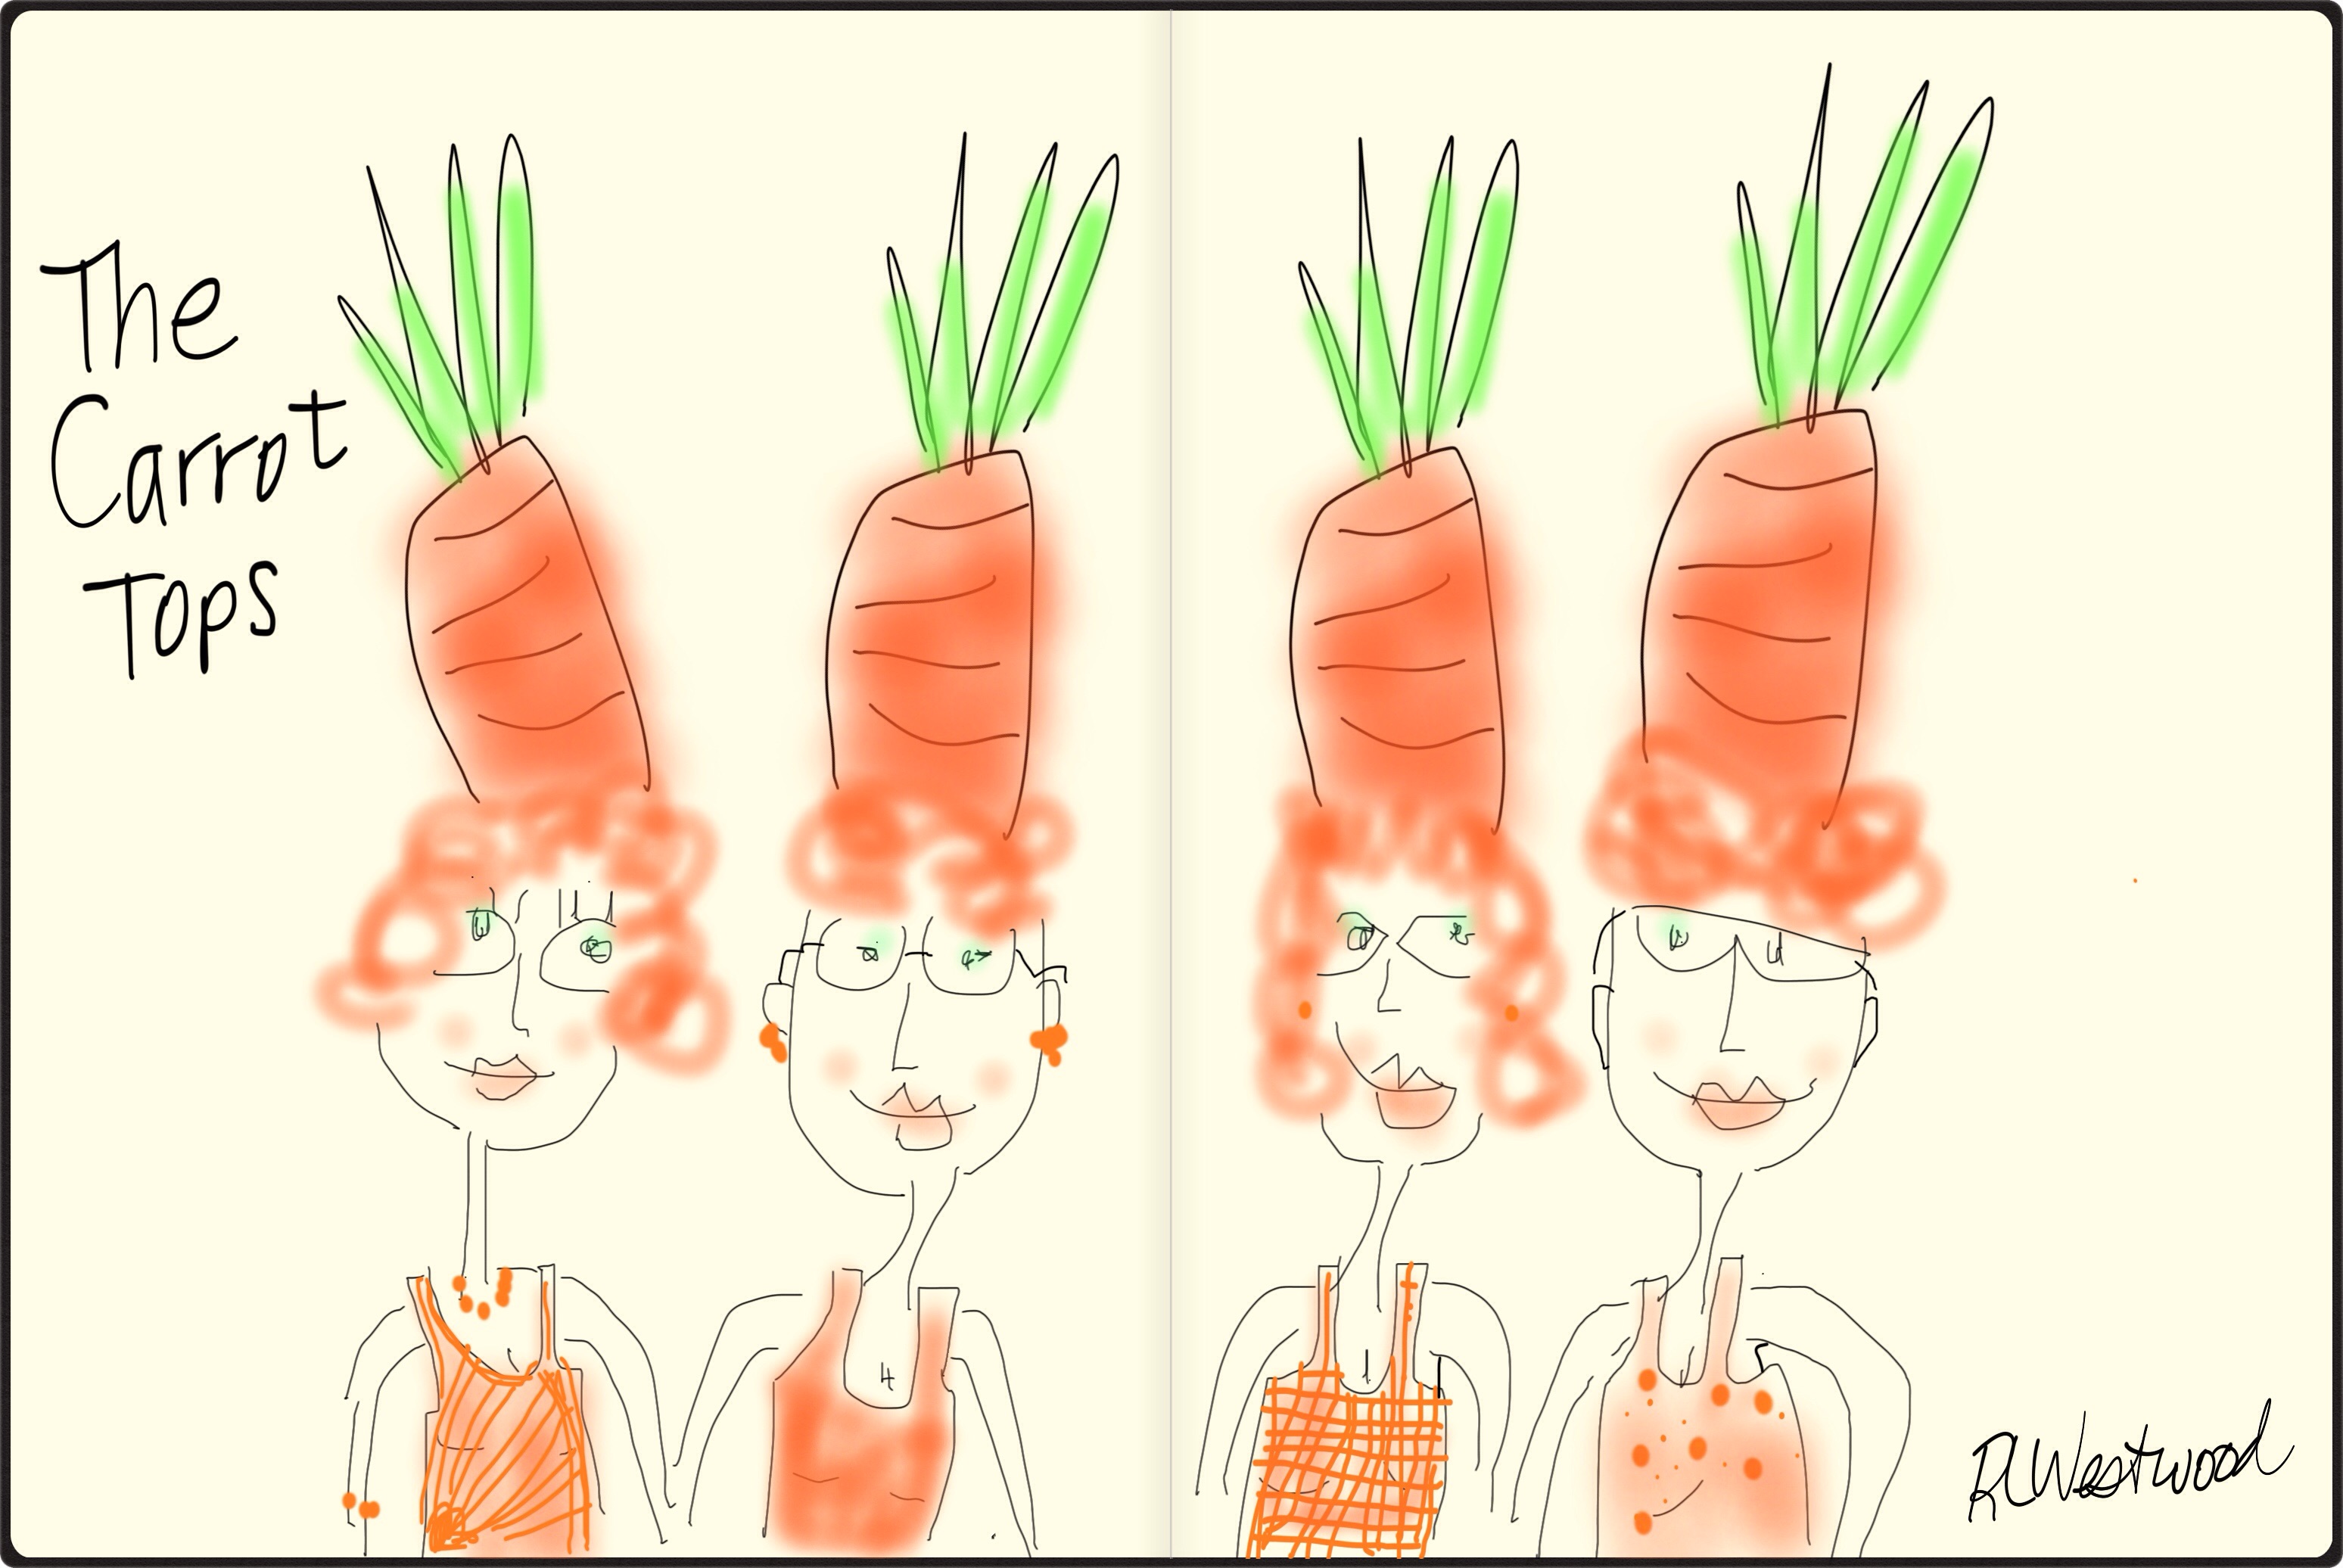 The Carrot Tops